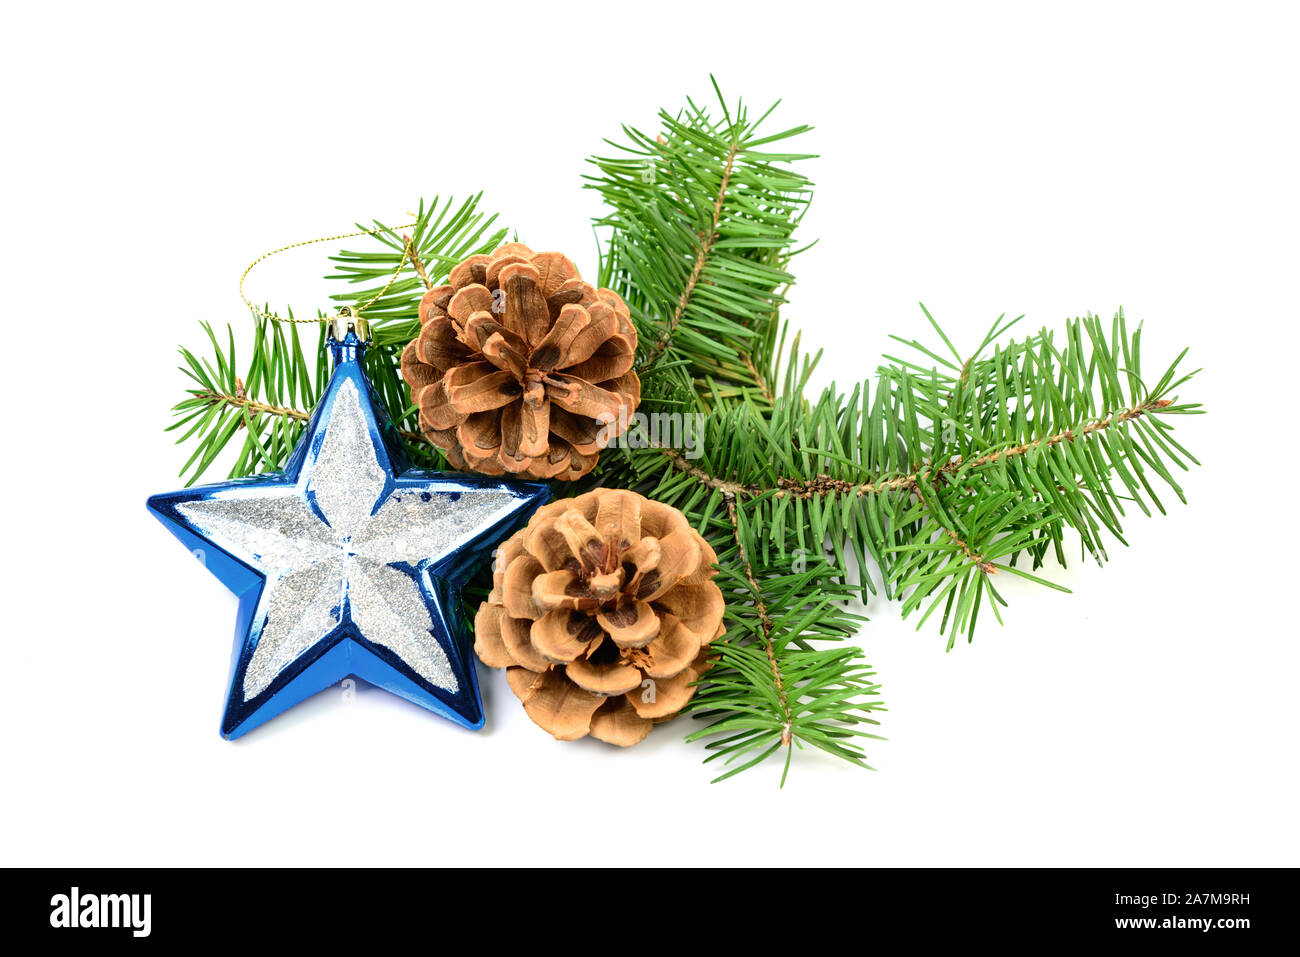 Pine cones with spruce tree branch and Christmas decoration on a white background Stock Photo